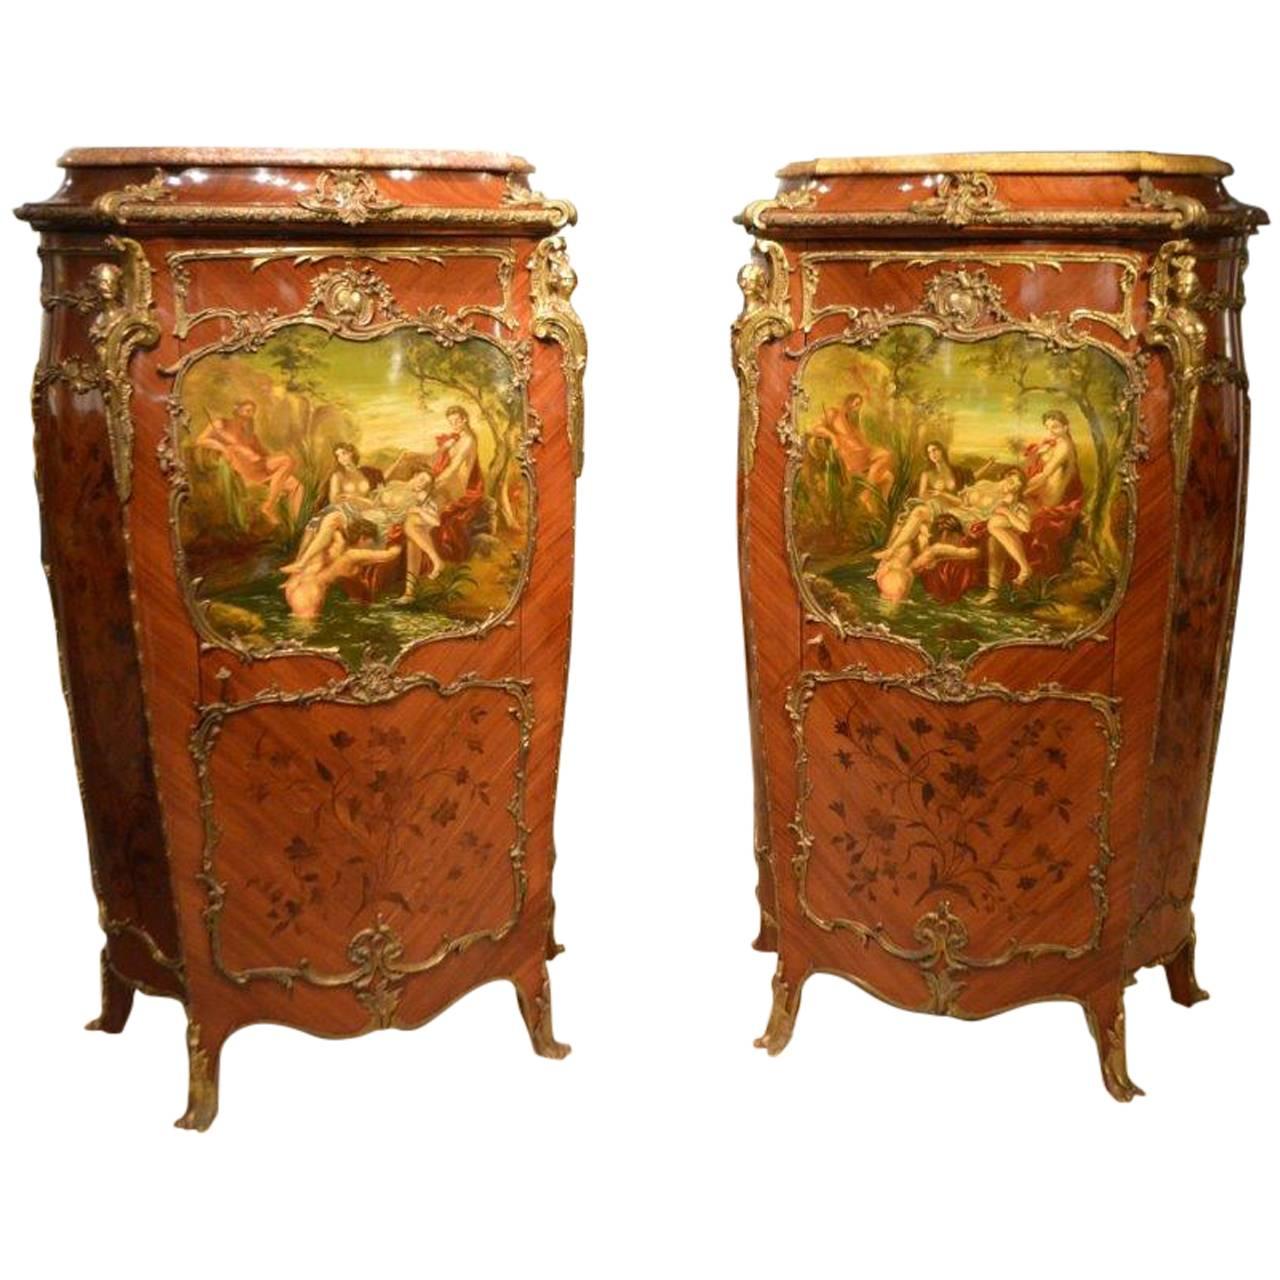 Pair of Mahogany Ormolu-Mounted French Serpentine Cabinets with Vernis Martin For Sale